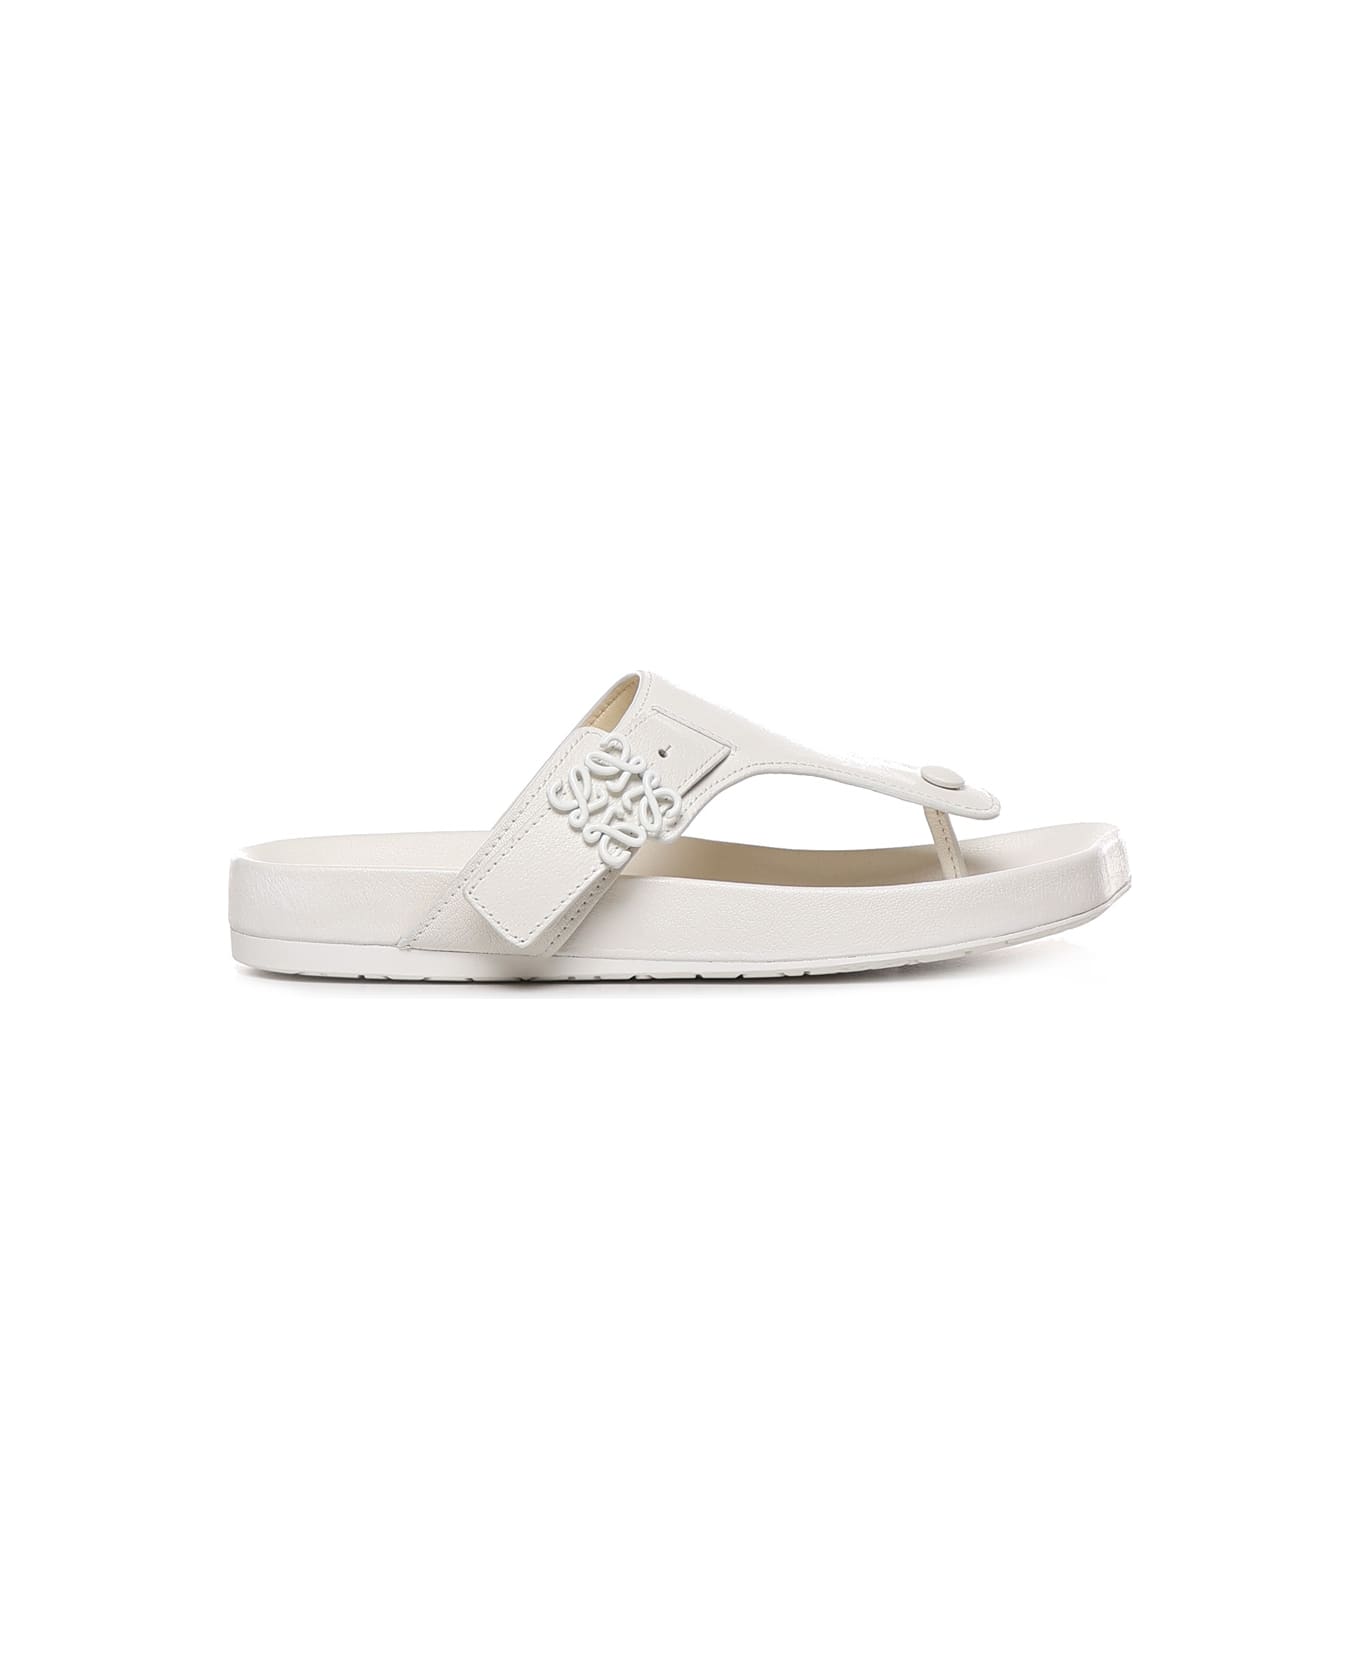 Loewe Ease Sandals In Rubber - White サンダル